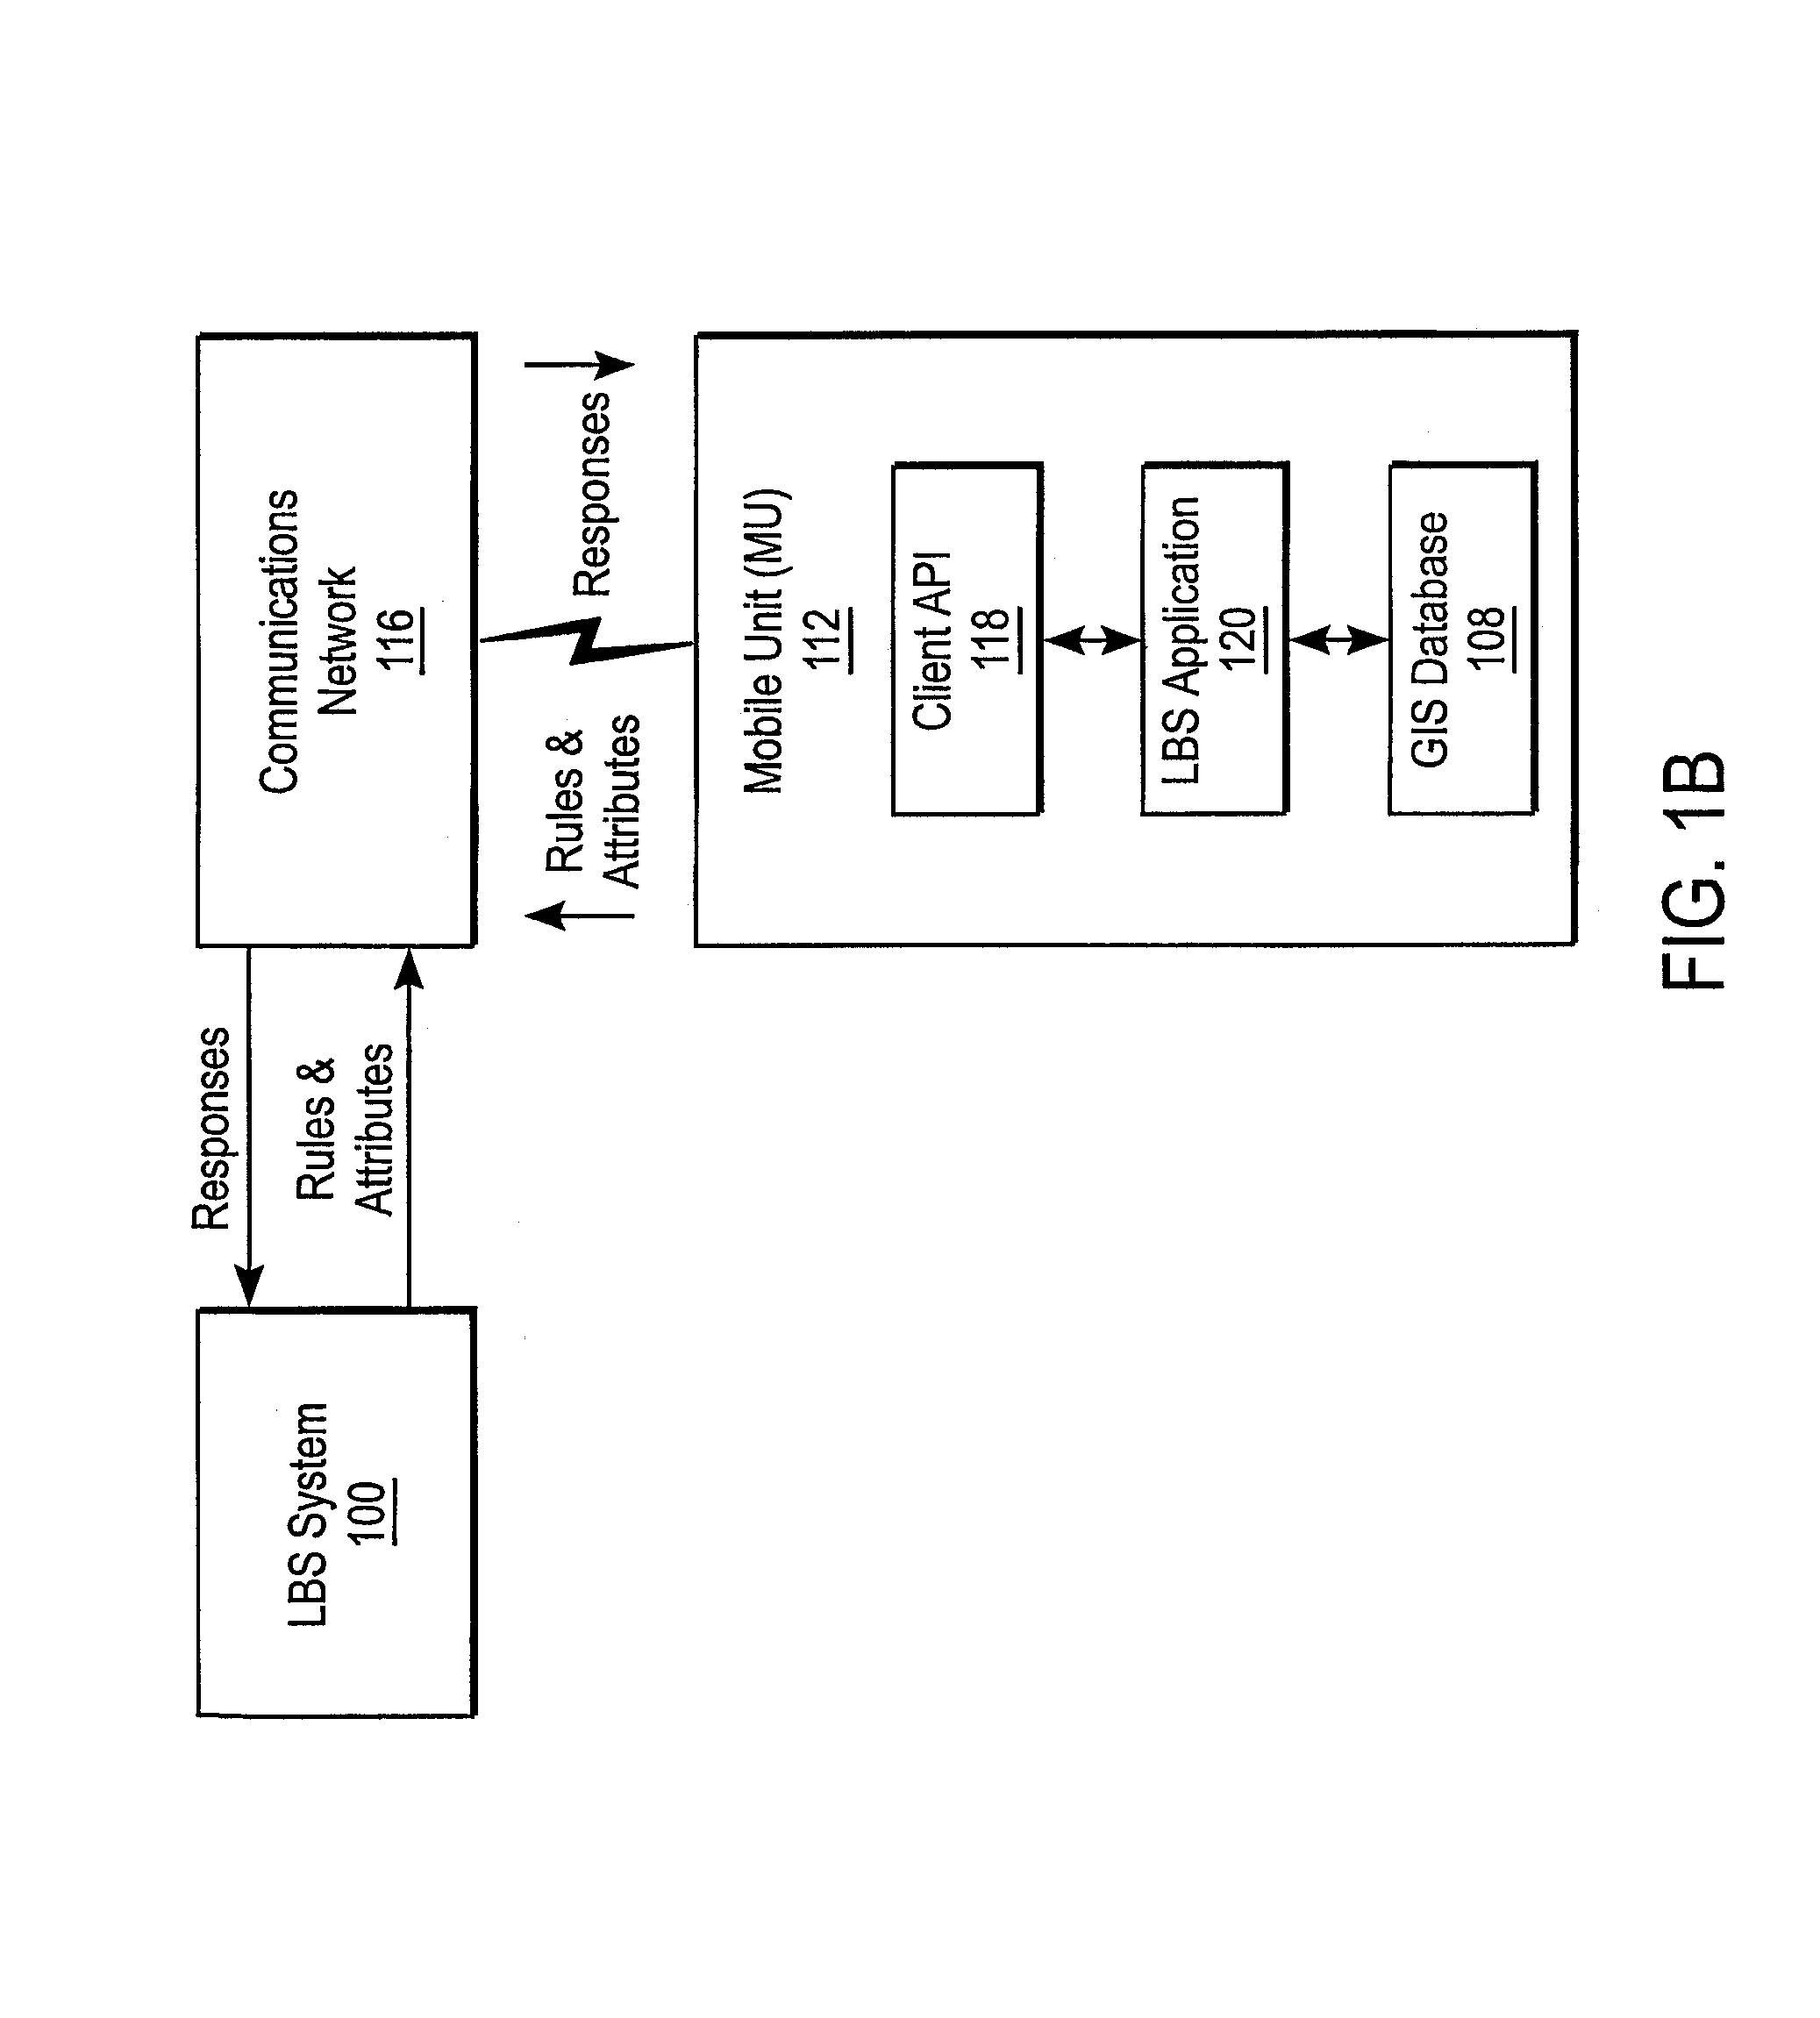 System and method for initiating responses to location-based events